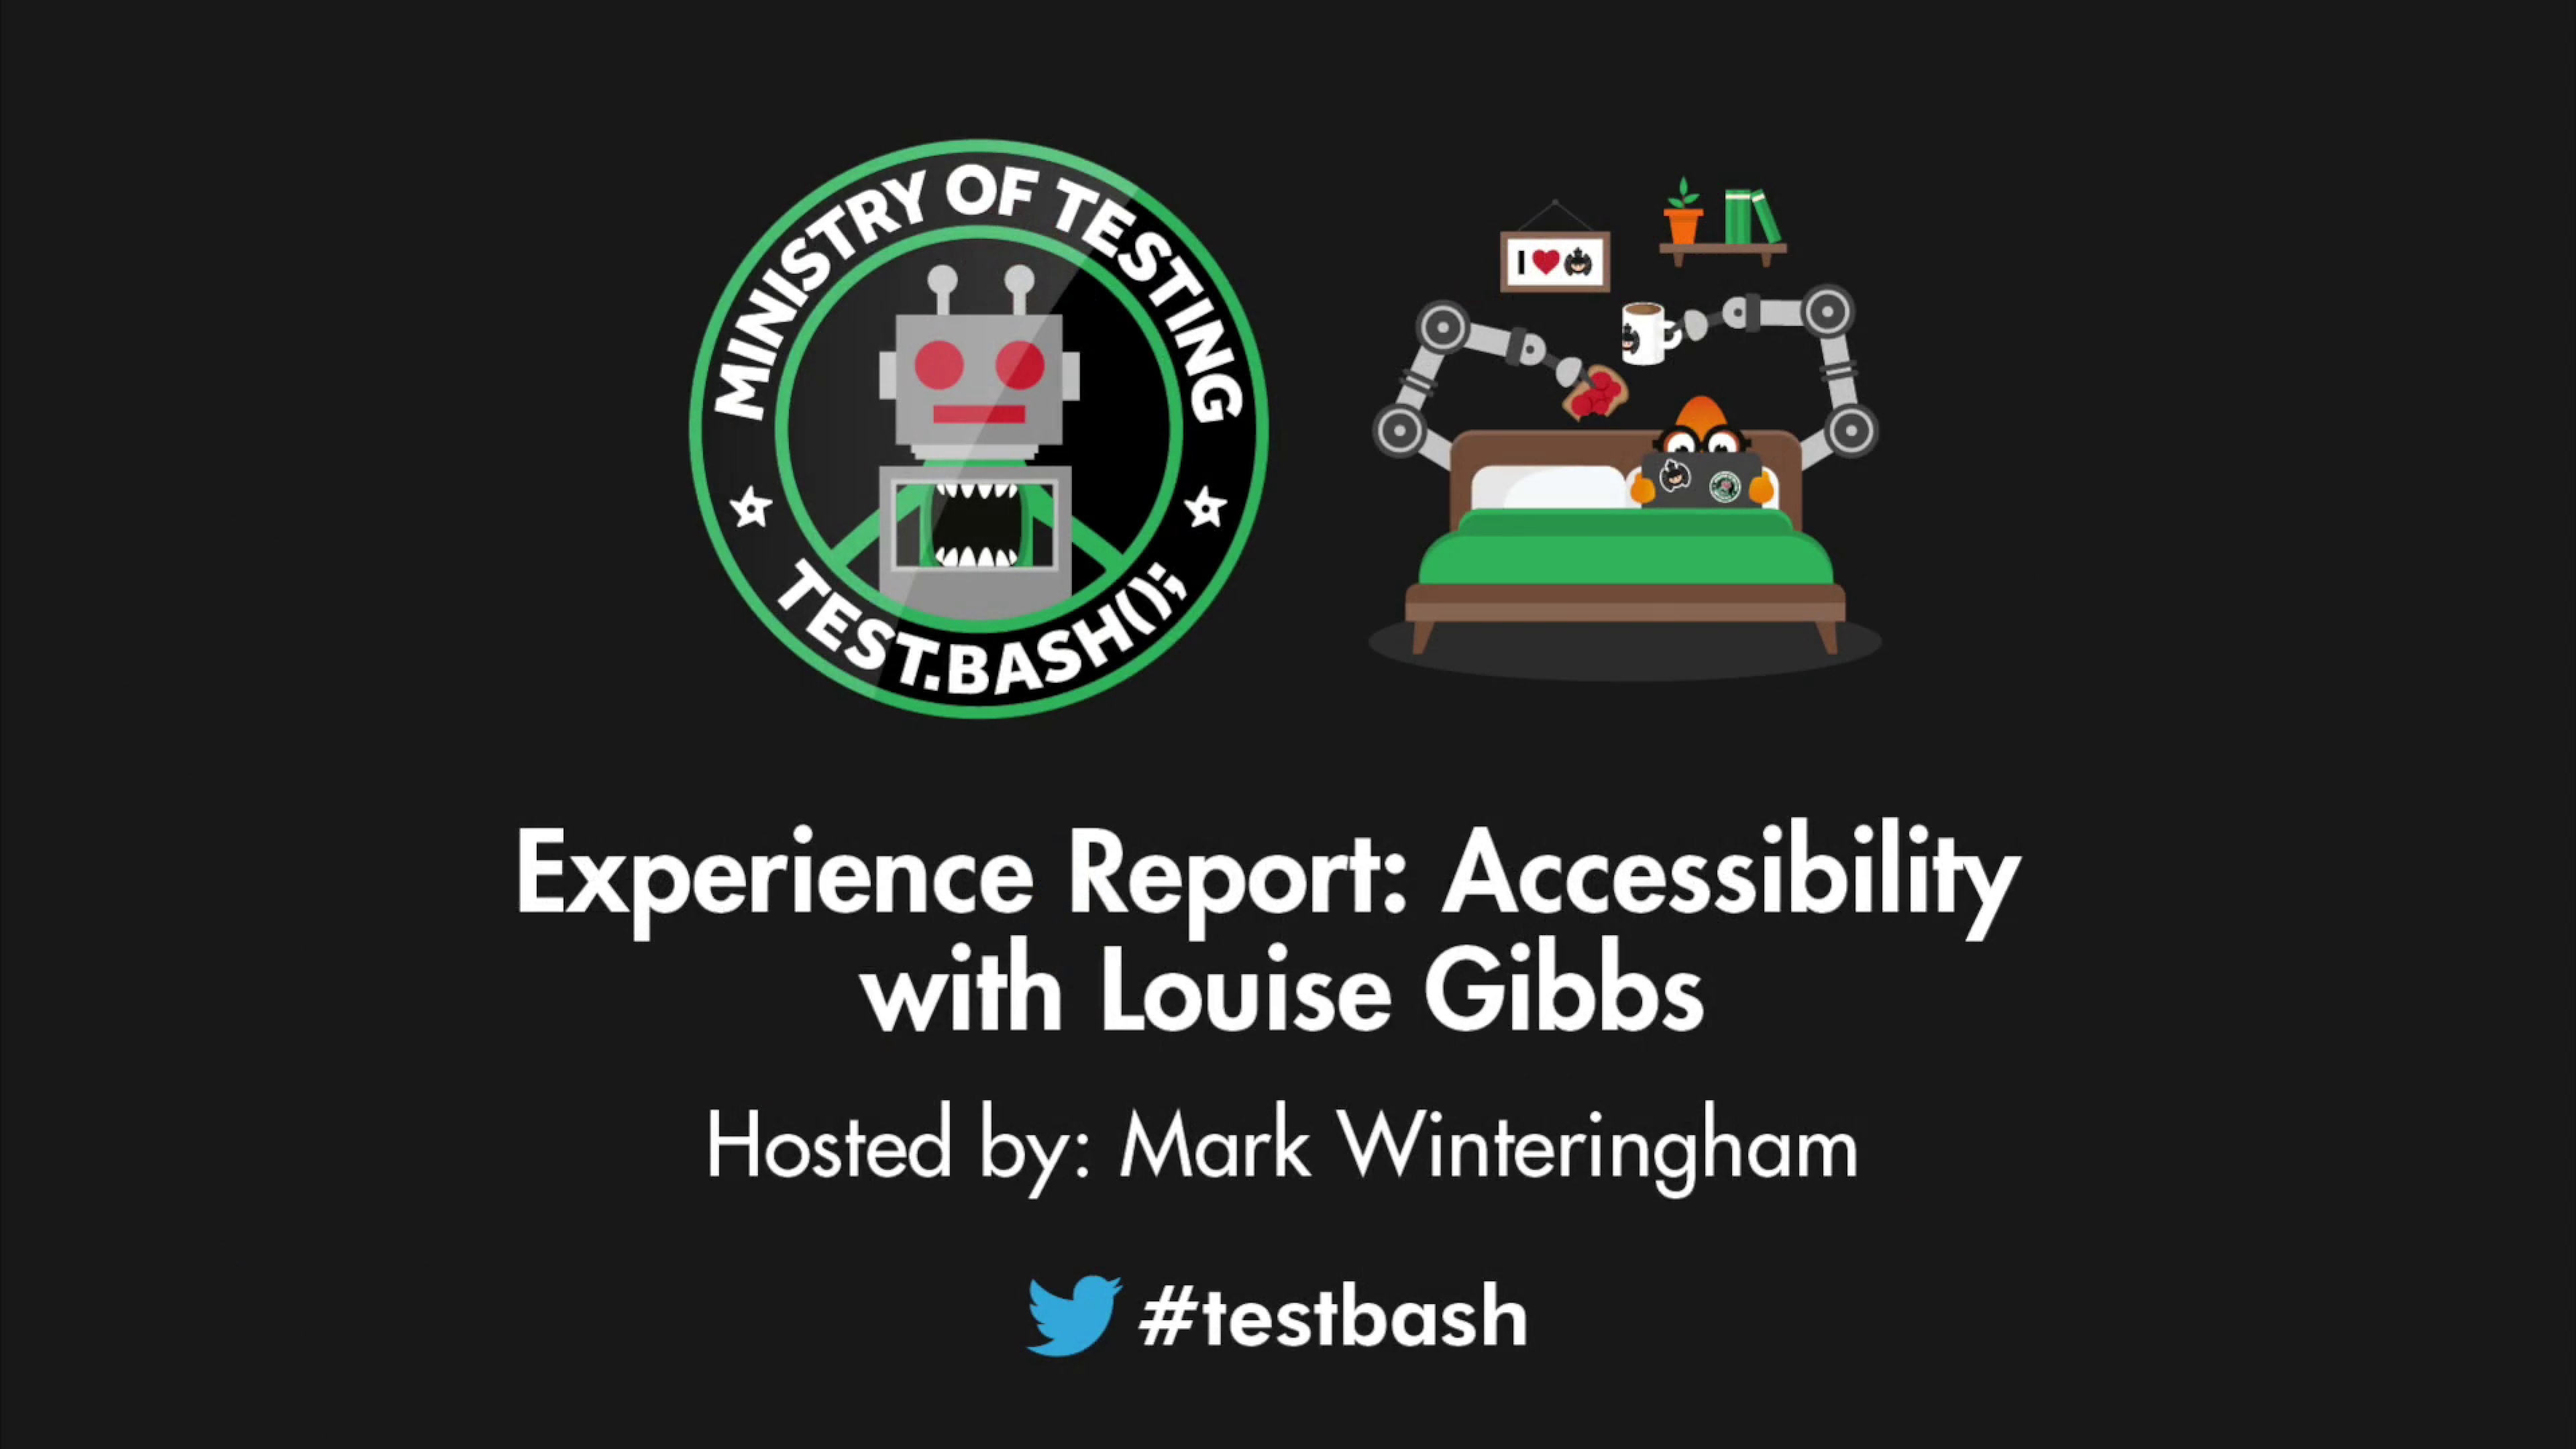 Experience Report: Accessibility - Louise Gibbs